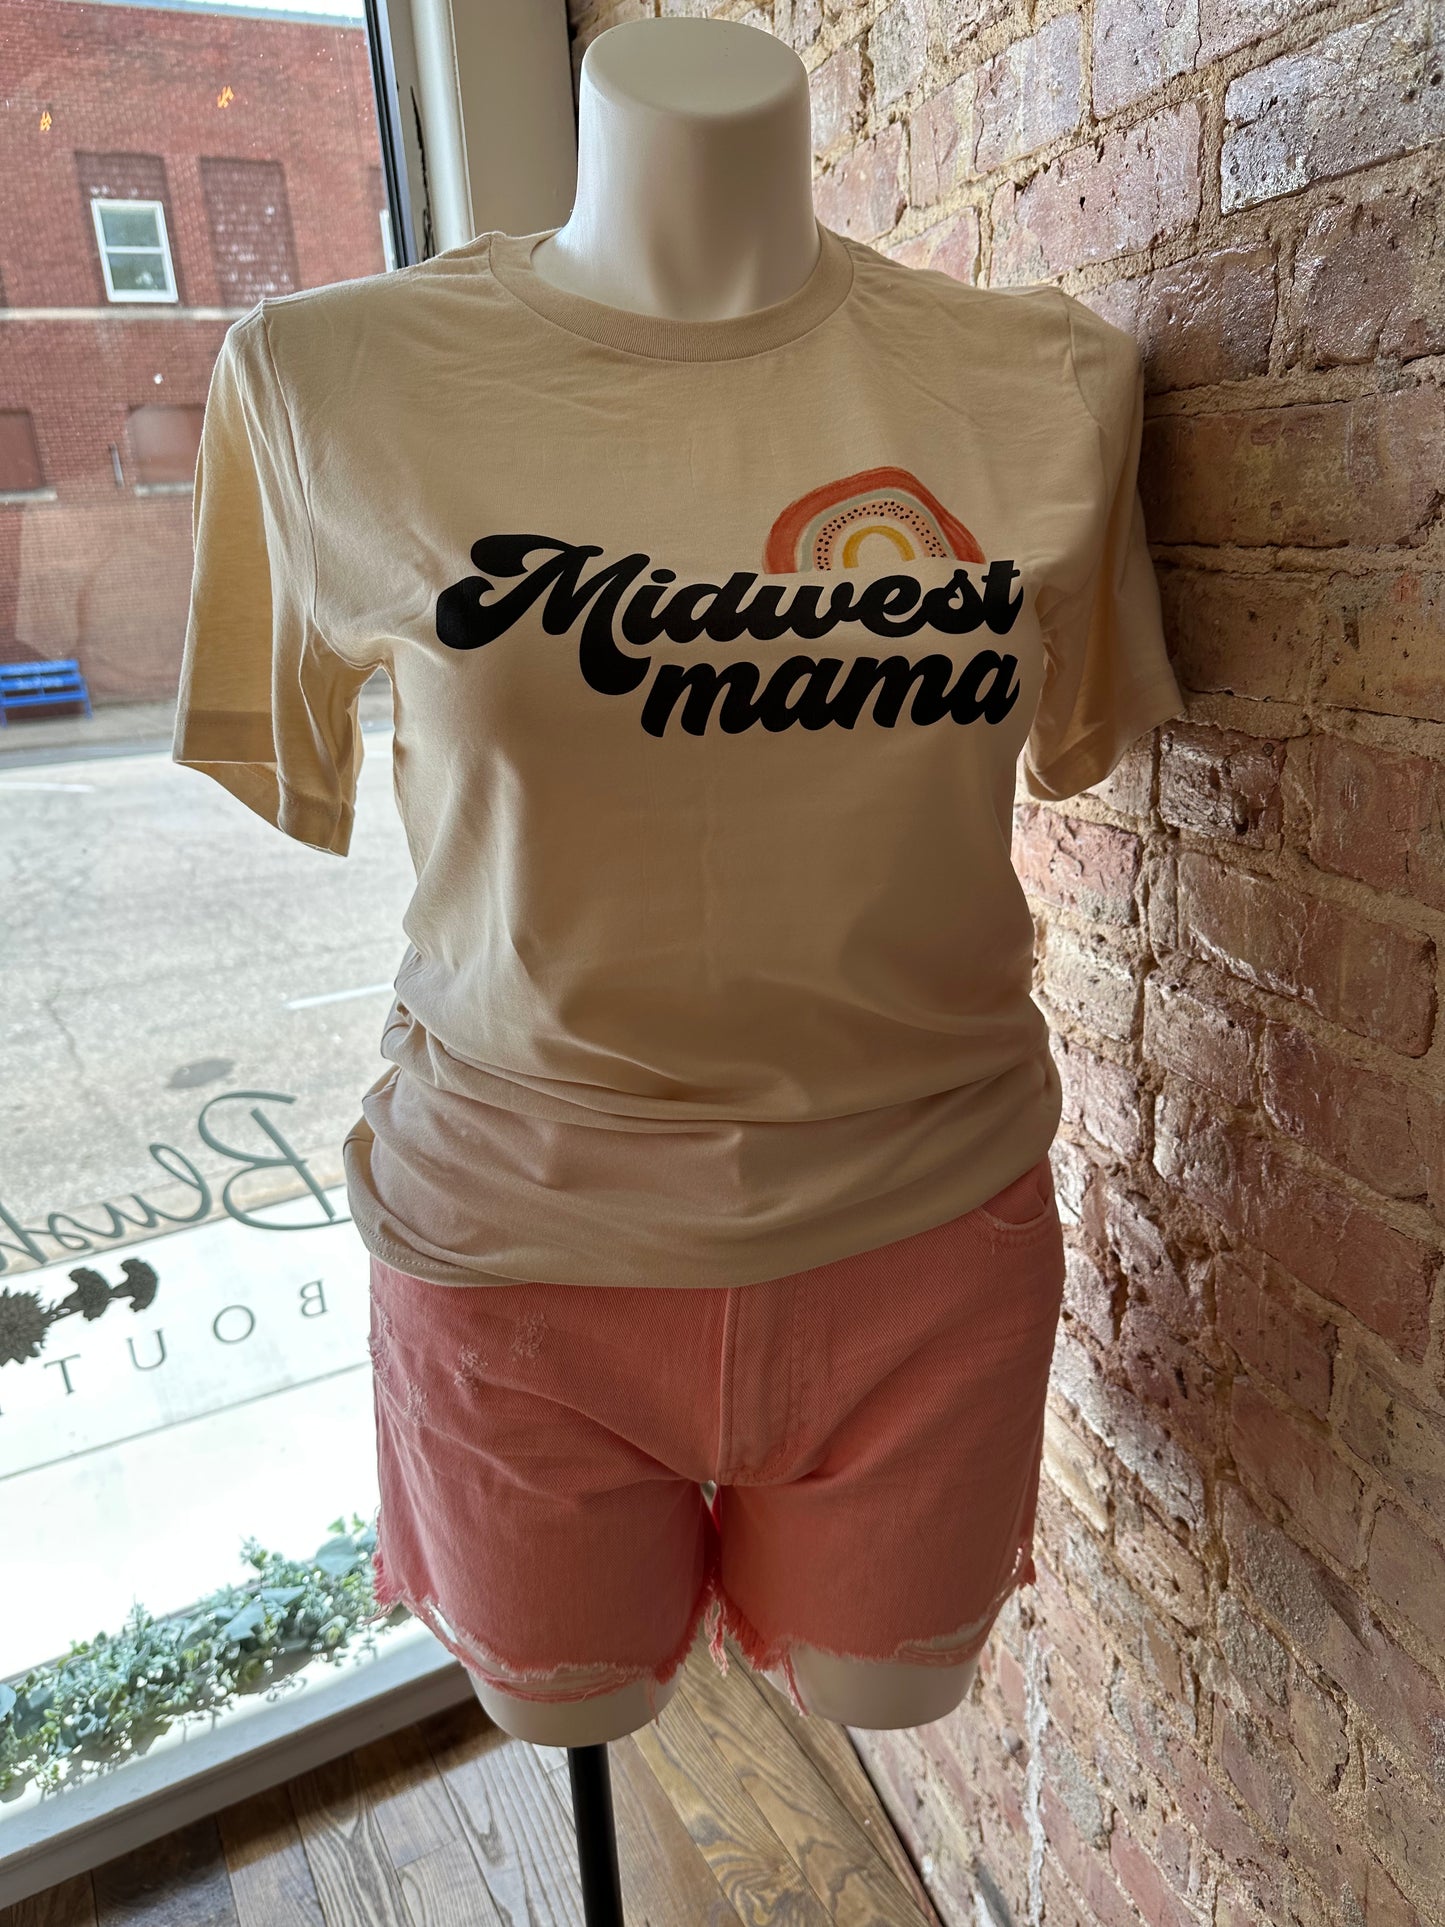 Midwest Mama tee